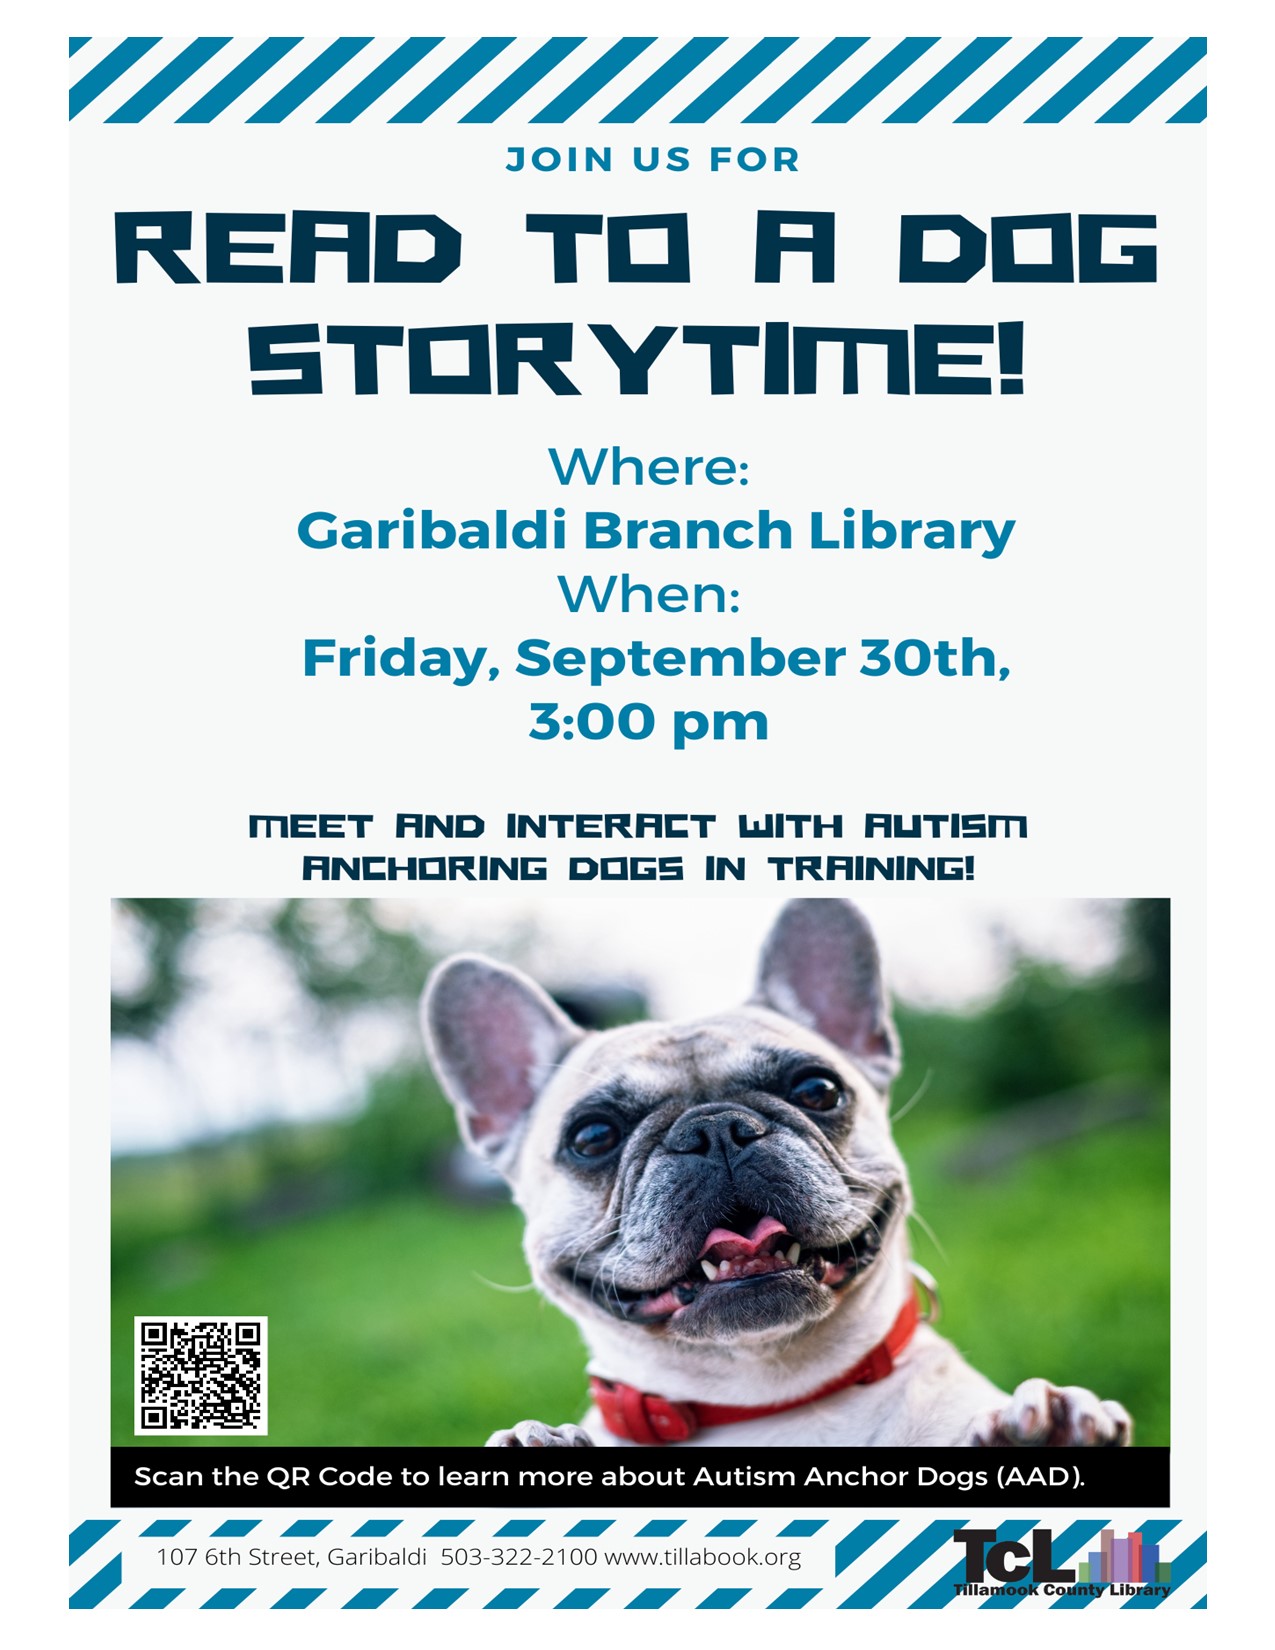 Read to a Dog flyer 1Oznhl.tmp